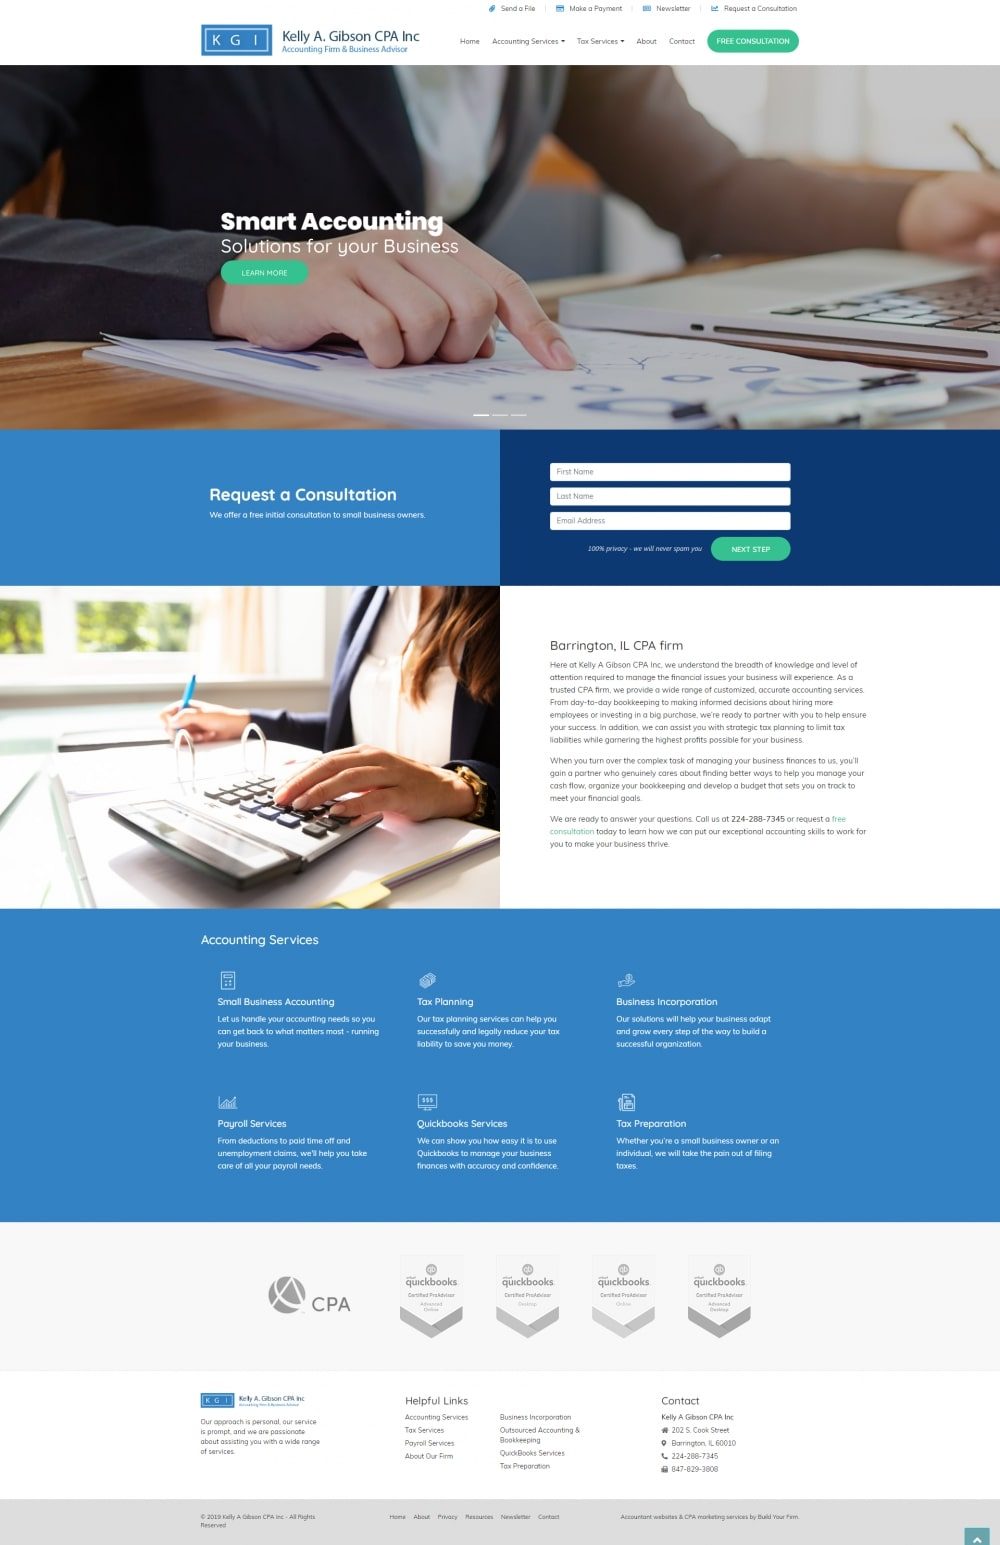 Website of Kelly A Gibson CPA Inc